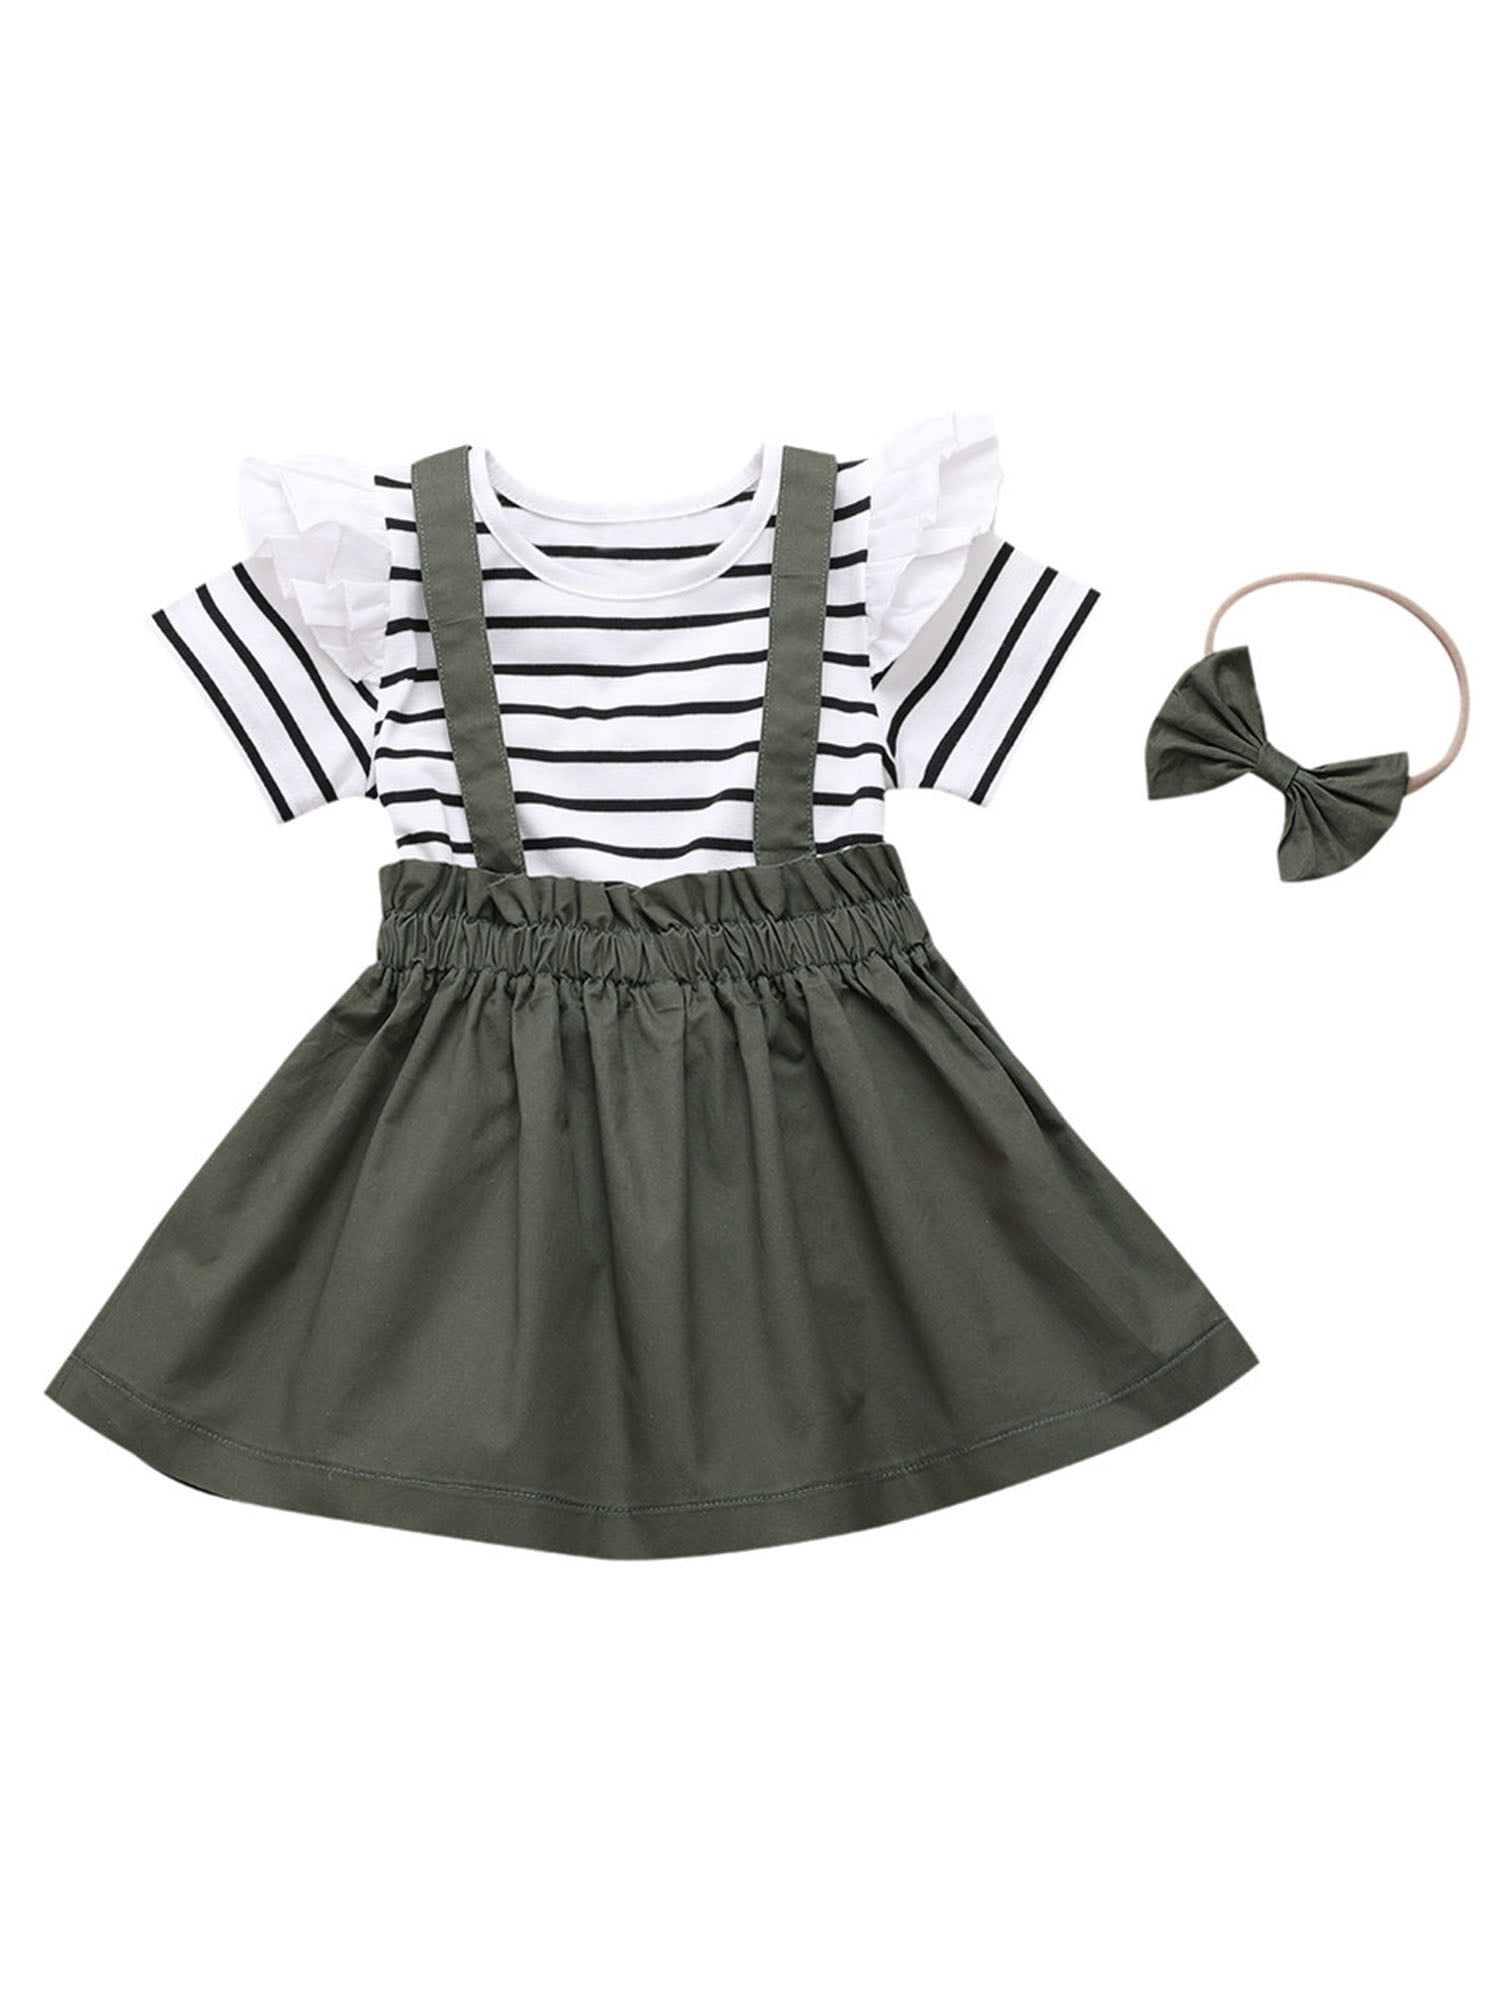 2Pcs Set Newborn Baby Girl Outift Ruffle Sleeve White T-Shirt Tops+Suspender Pleated Skirt Overalls Clothes 